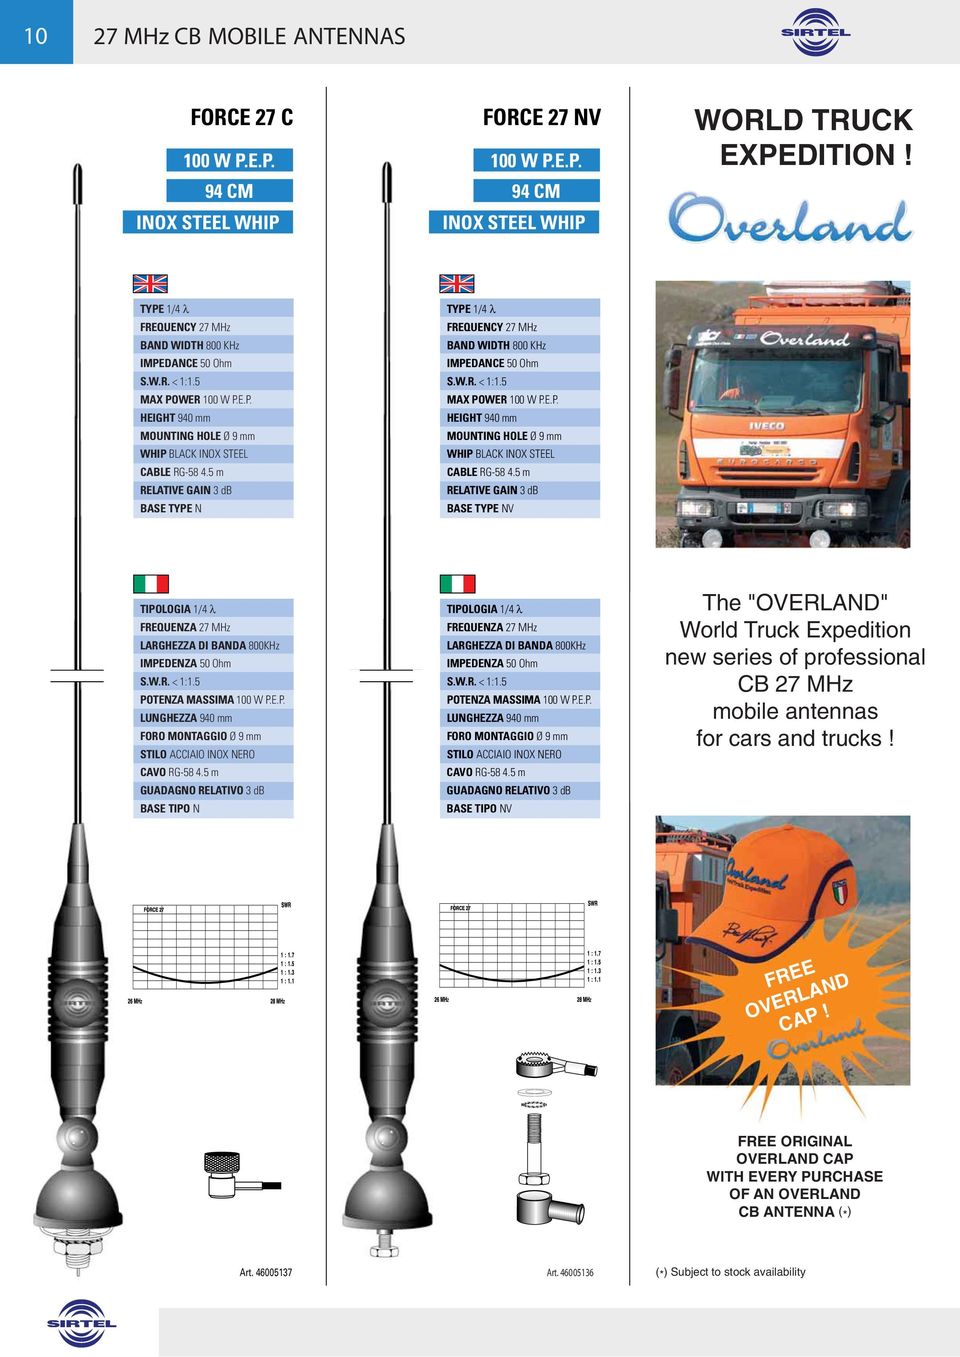 E.P. LUNGHEZZA 940 mm FORO MONTAGGIO Ø 9 mm NERO The "OVERLAND" World Truck Expedition new series of professional CB 27 MHz mobile antennas for cars and trucks! FREE OVERLAND CAP!